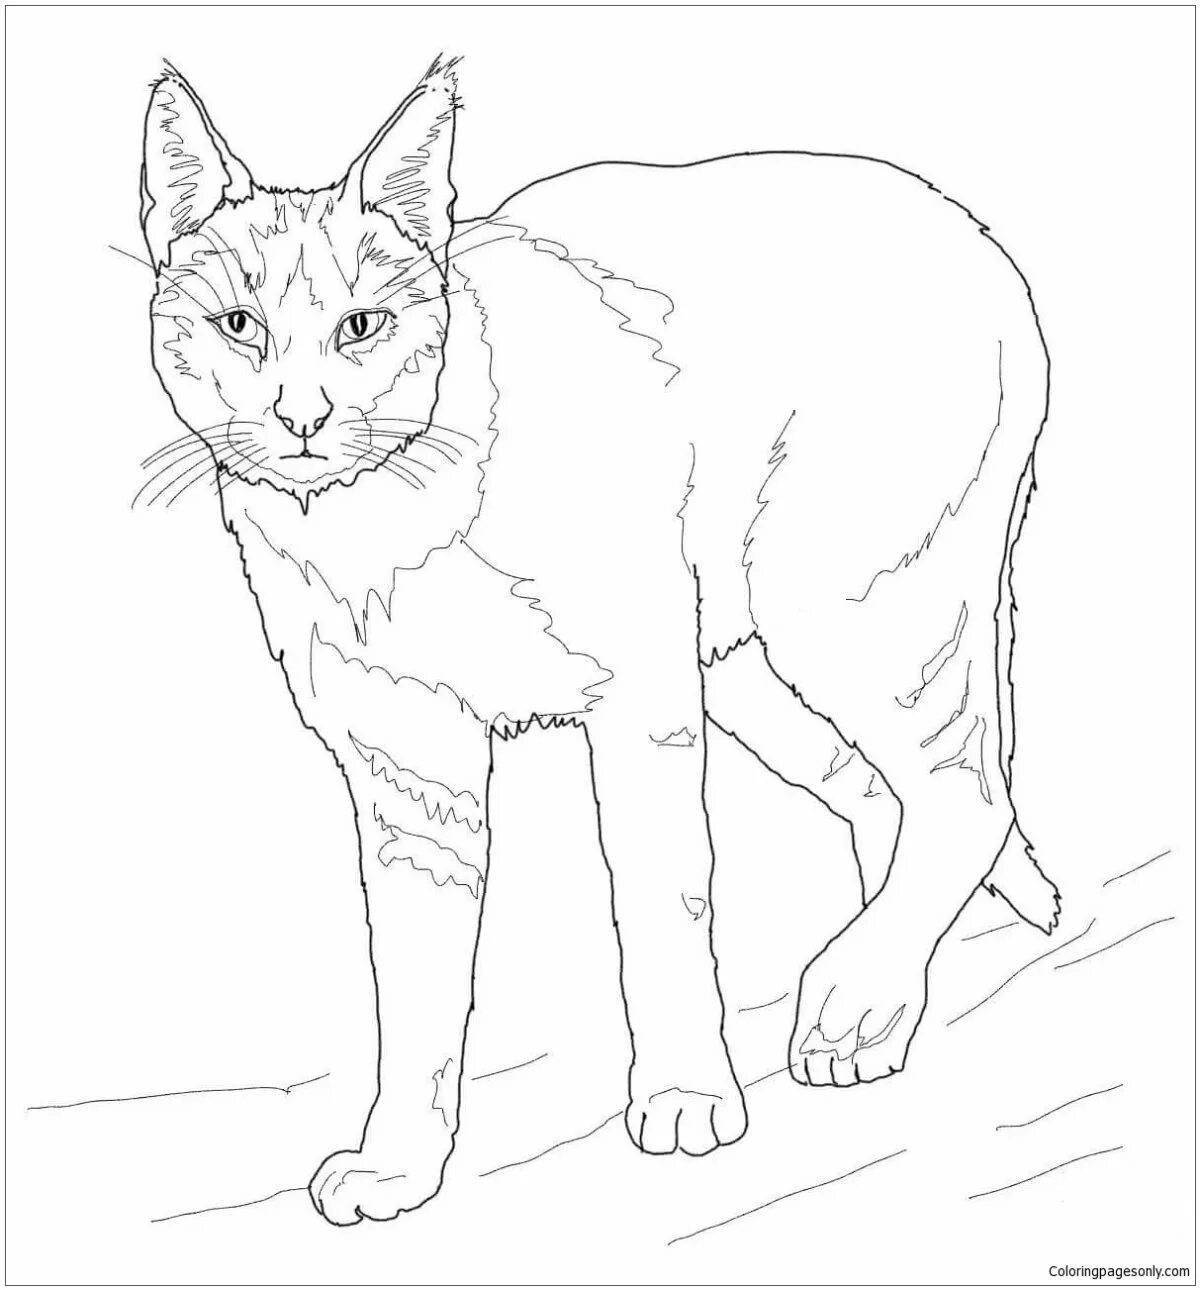 Awesome big cat coloring page